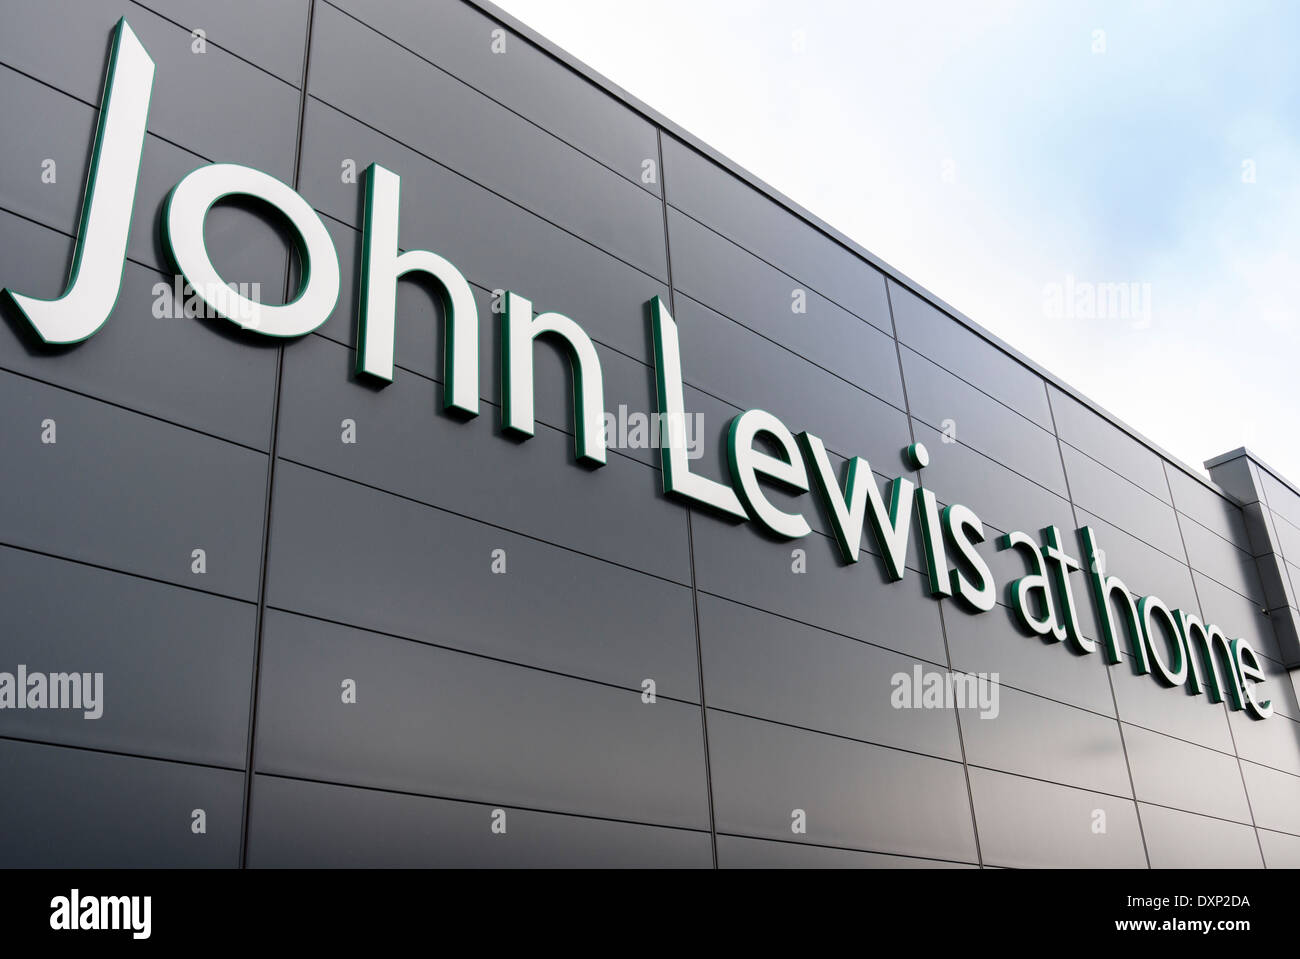 John Lewis At Home store in UK Stock Photo